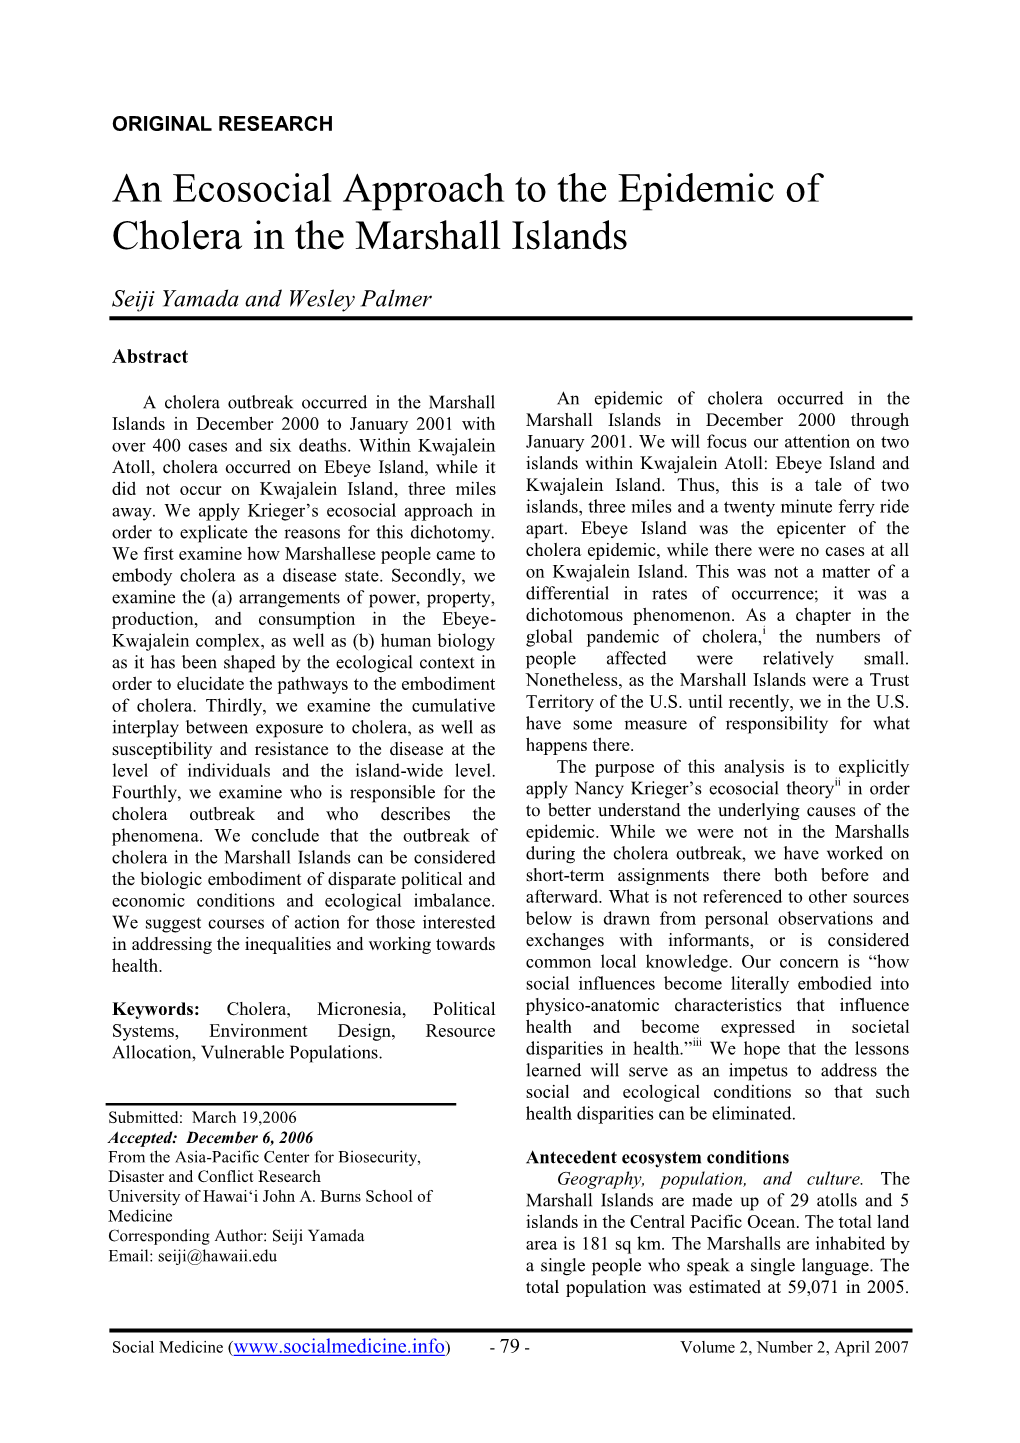 An Ecosocial Approach to the Epidemic of Cholera in the Marshall Islands